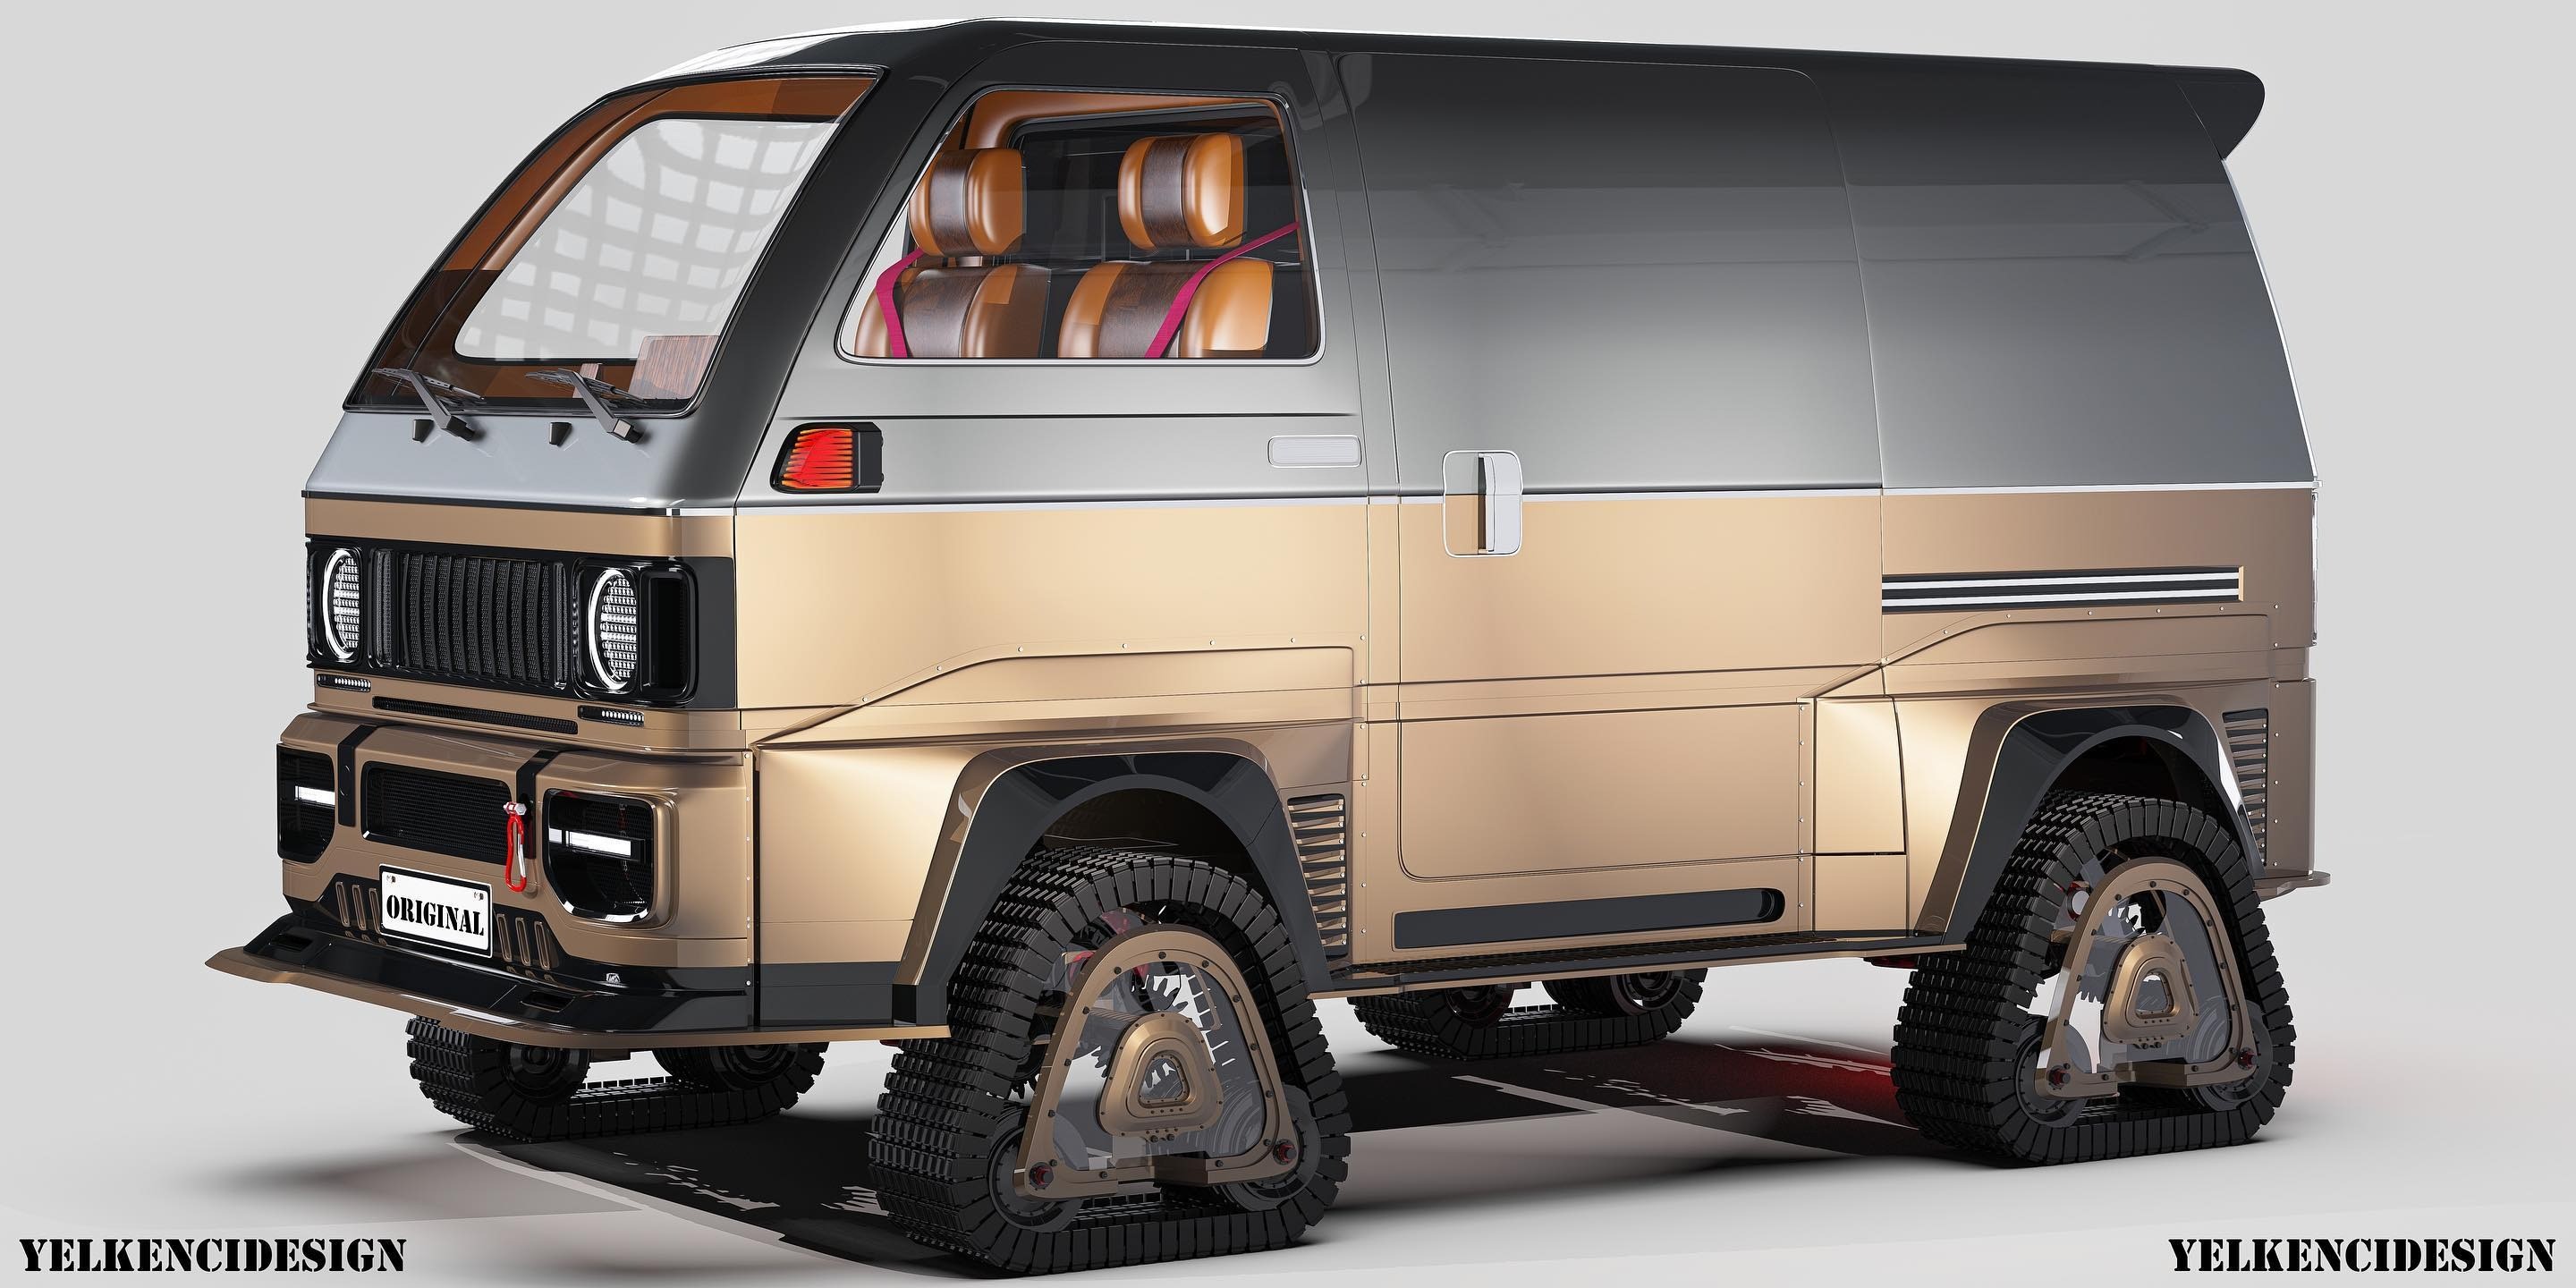 Suzuki Carry Kei Truck Morphs Into Unusual, HighDetail 3D Electric